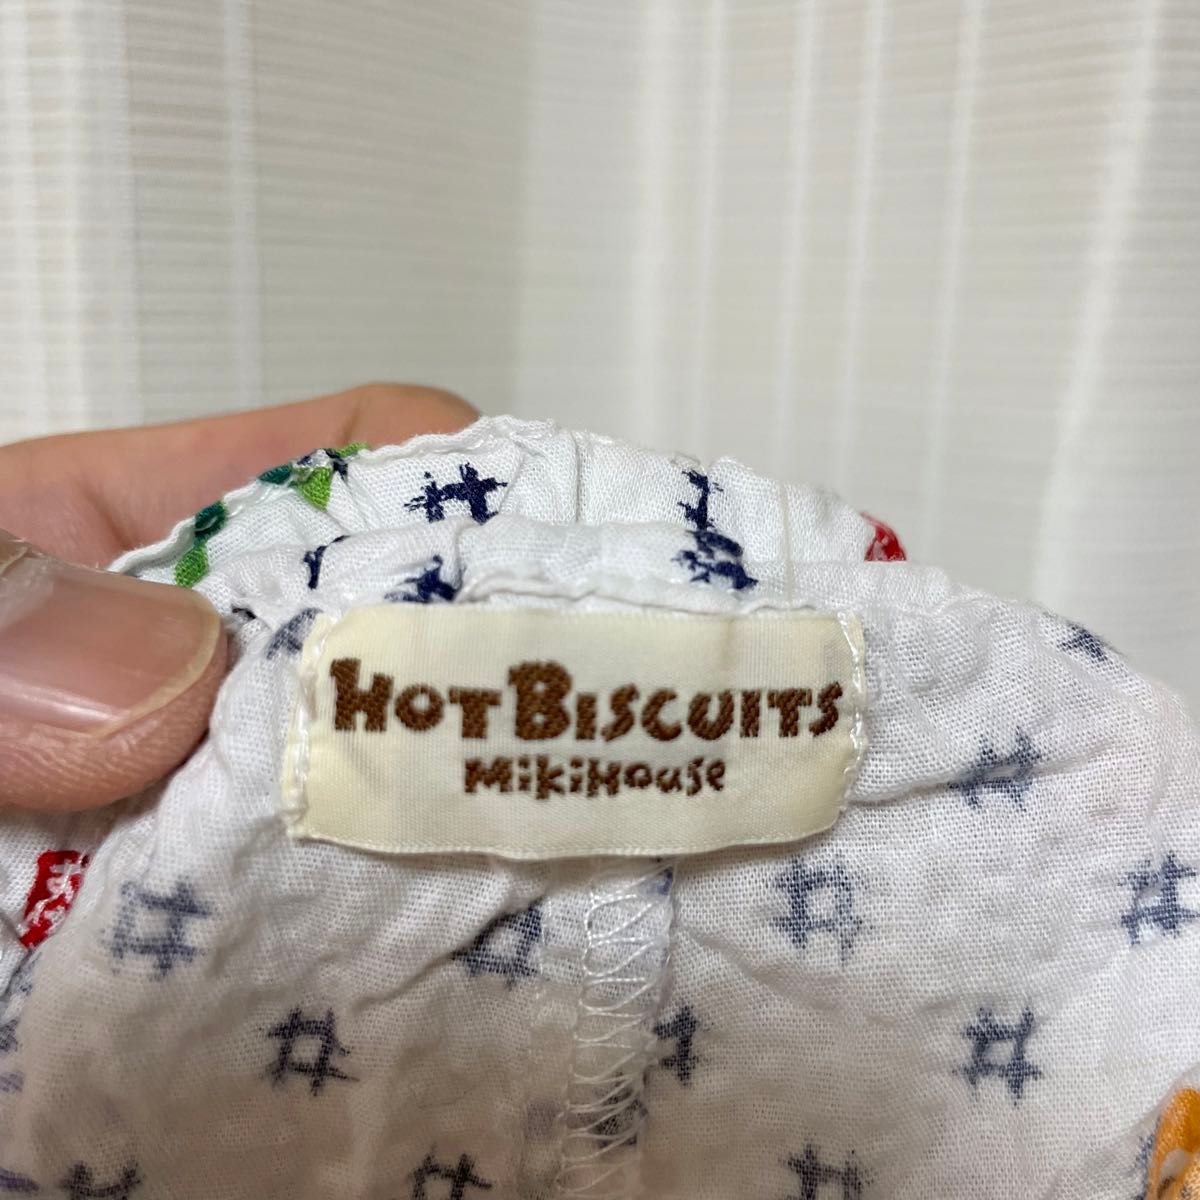 mikihouse hot biscuits 甚平 半袖 半ズボン 白 ホワイト 男の子